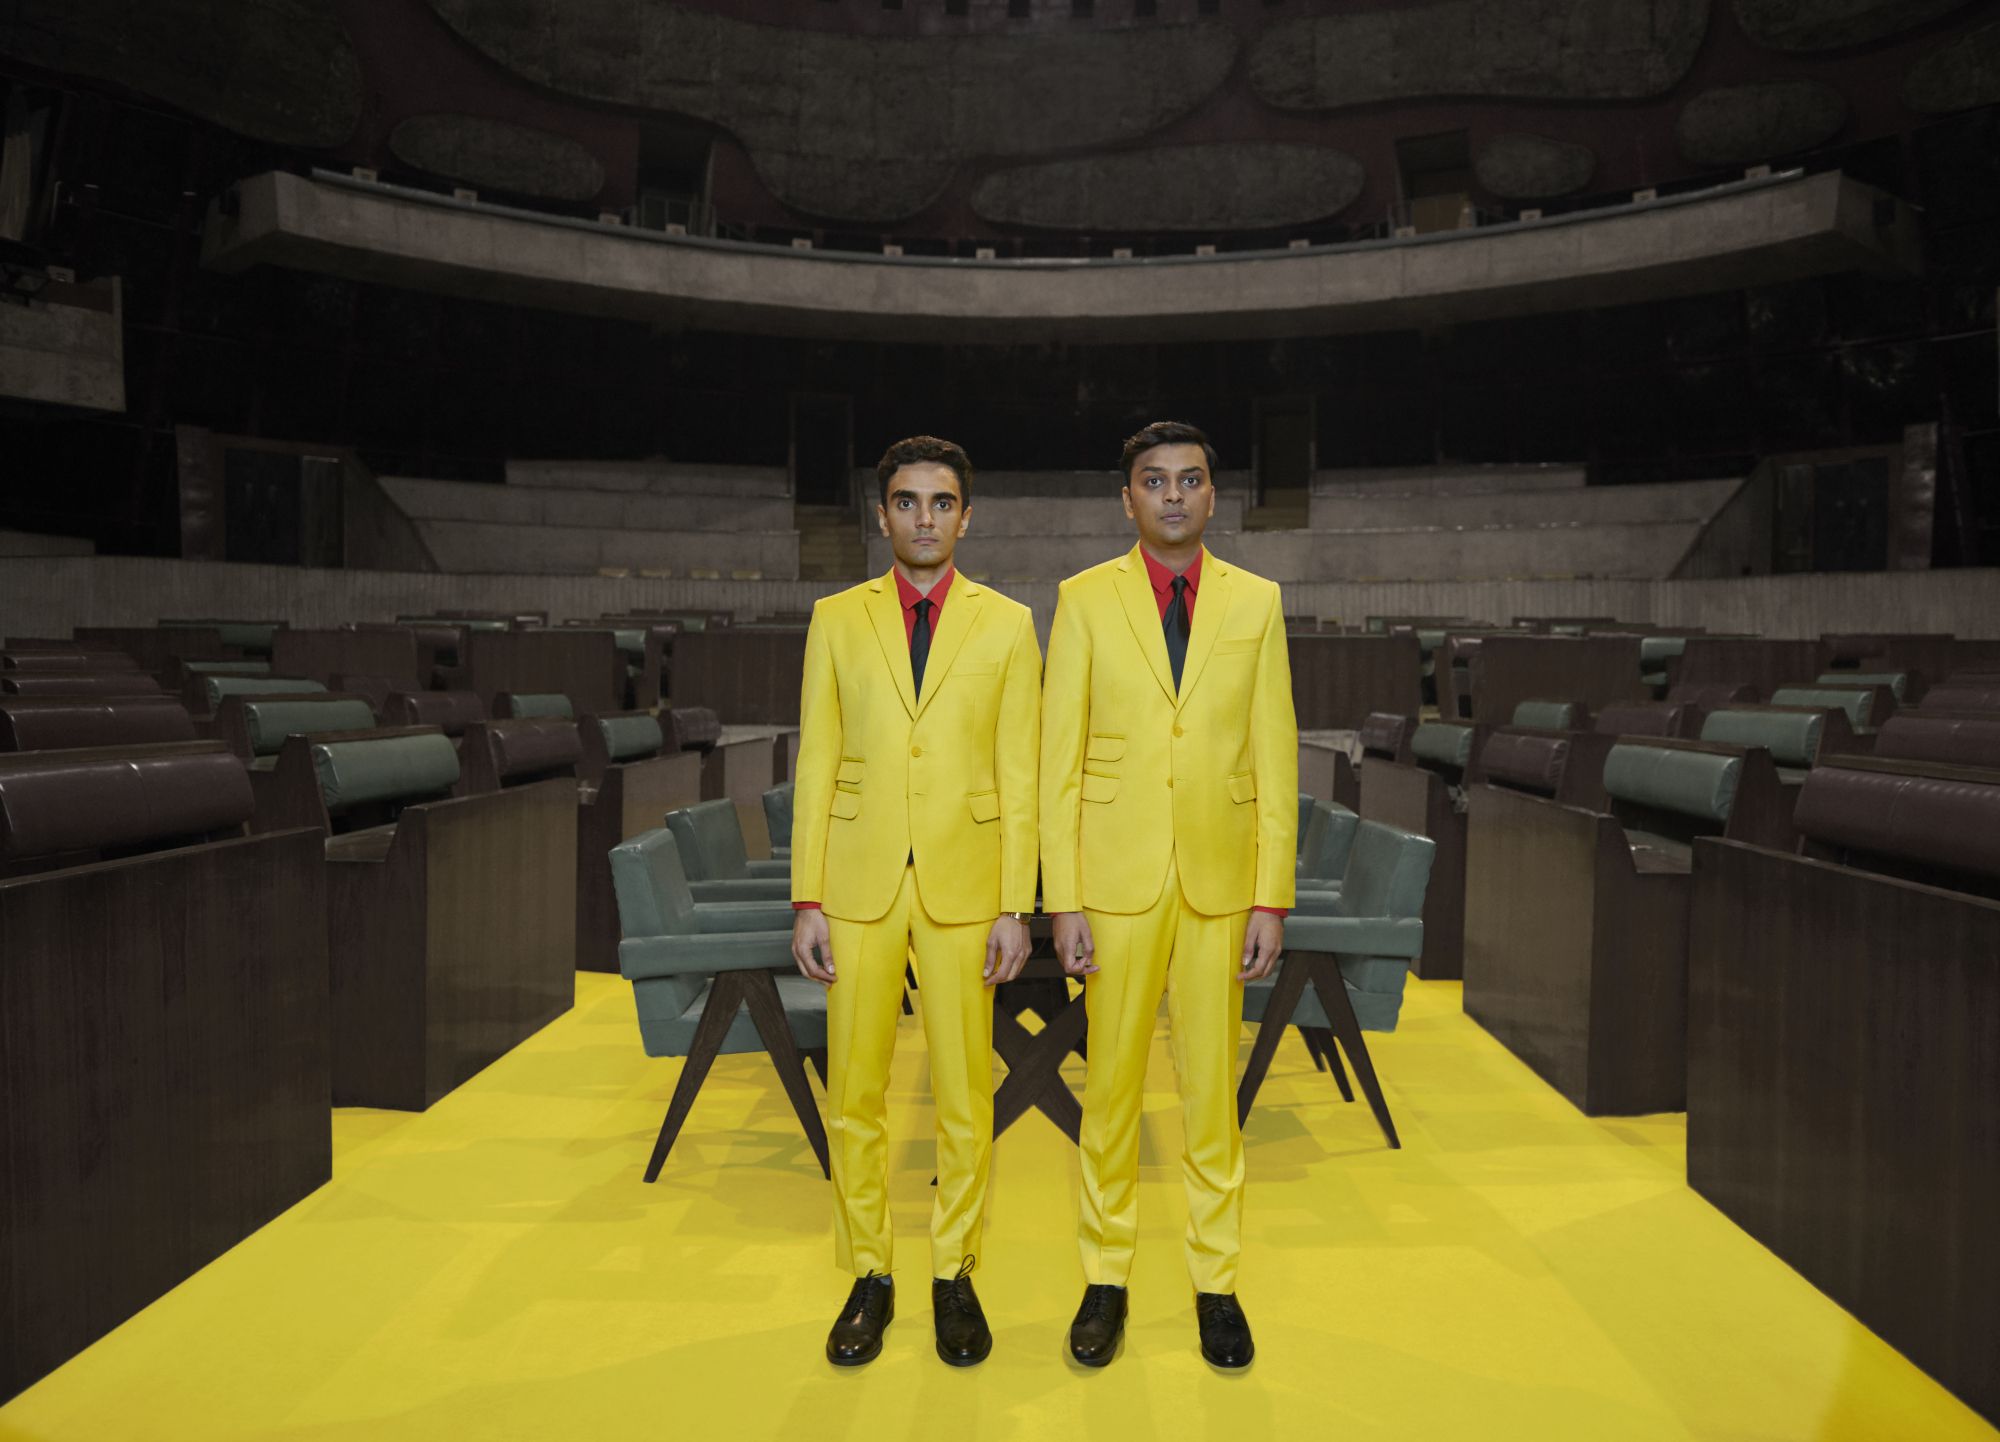 Photograph of Parekh & Singh wearing bright suits in an auditorium. Parekh & Singh are in bright yellow suits, red shirts, and black ties. They stand in an auditorium with a table and chairs behind them. The floor is bright yellow which matches their suits.